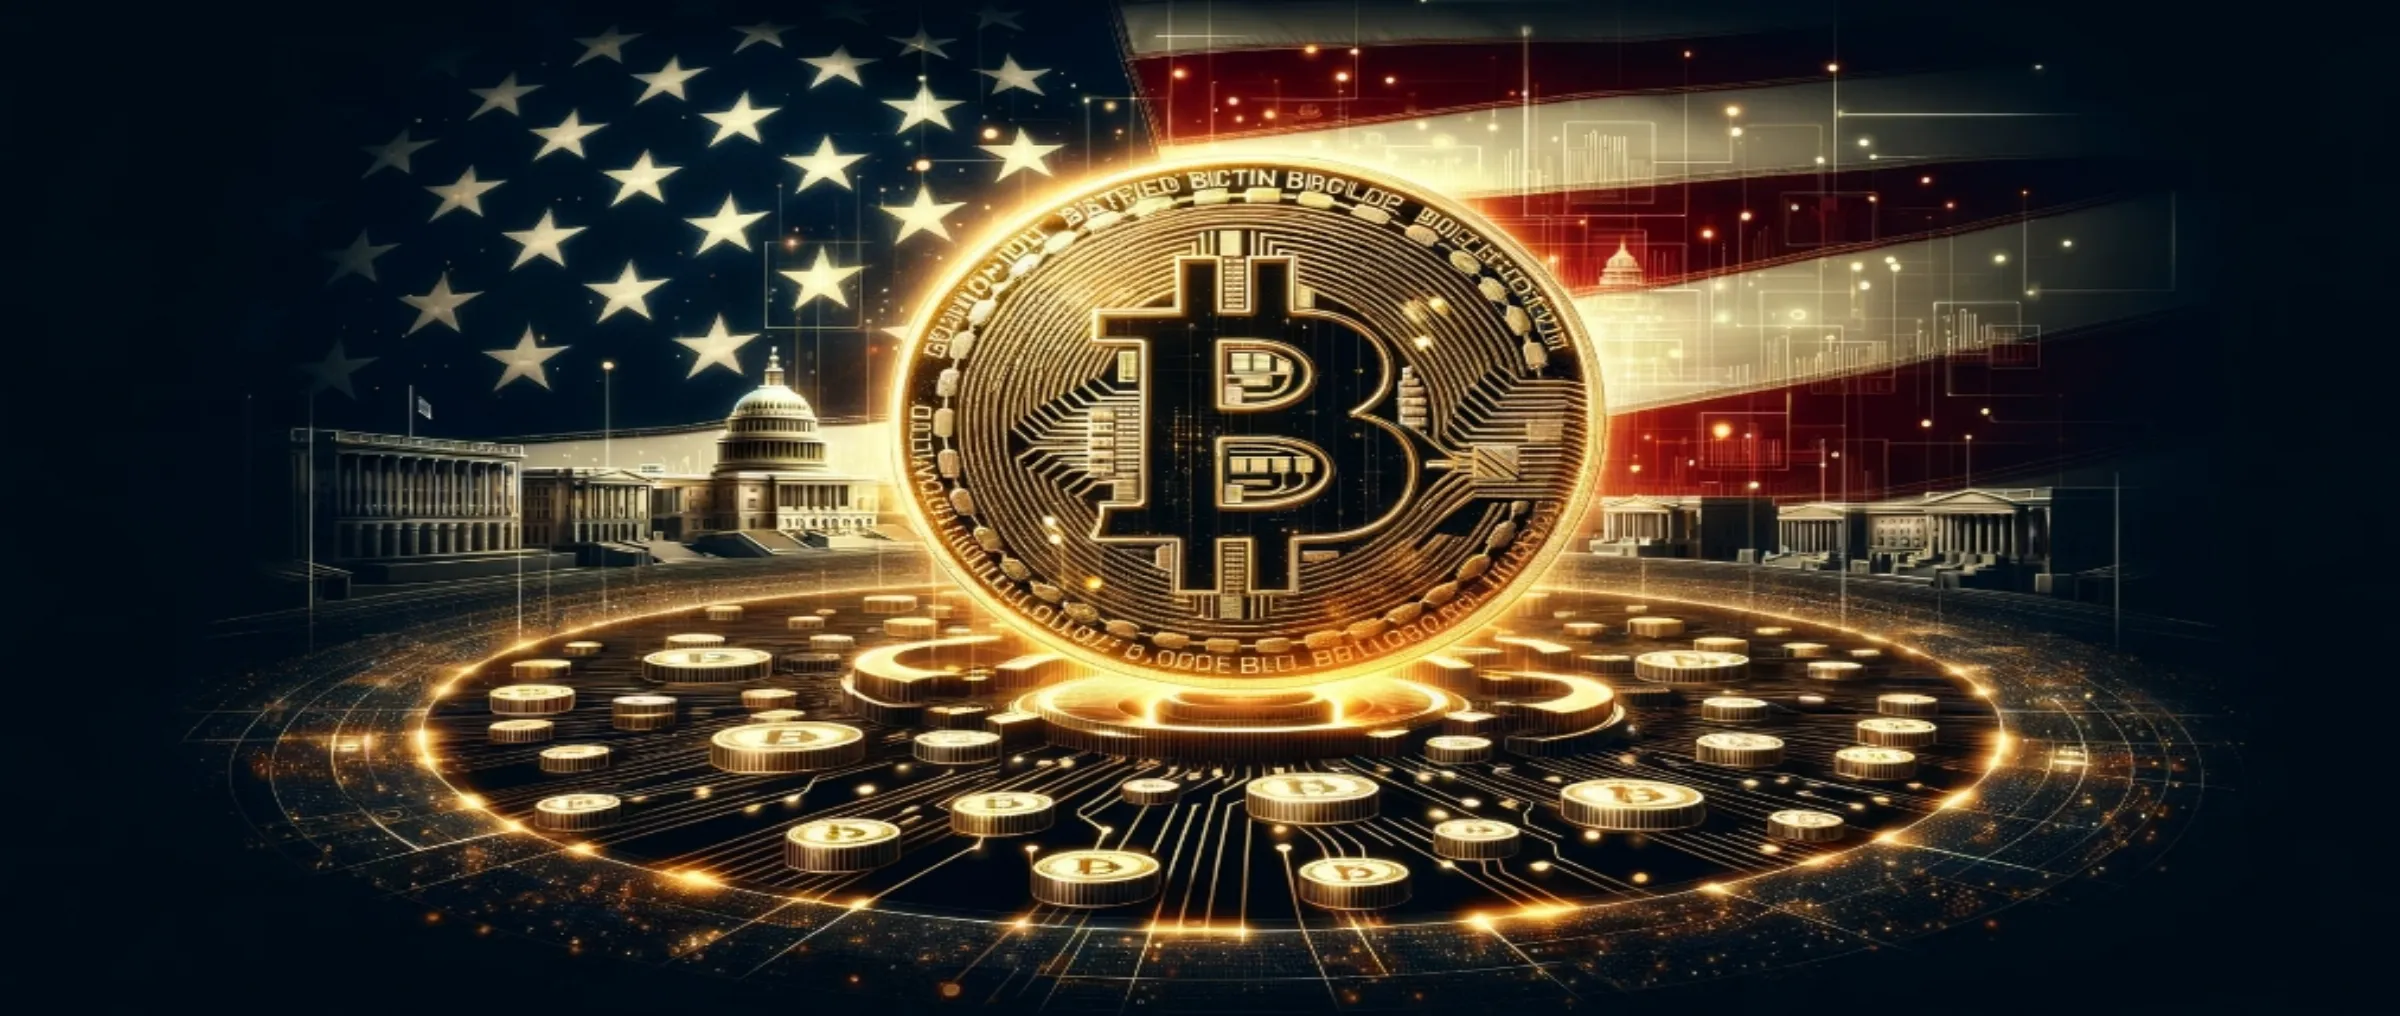 More than 210,000 BTC are under the control of the US government